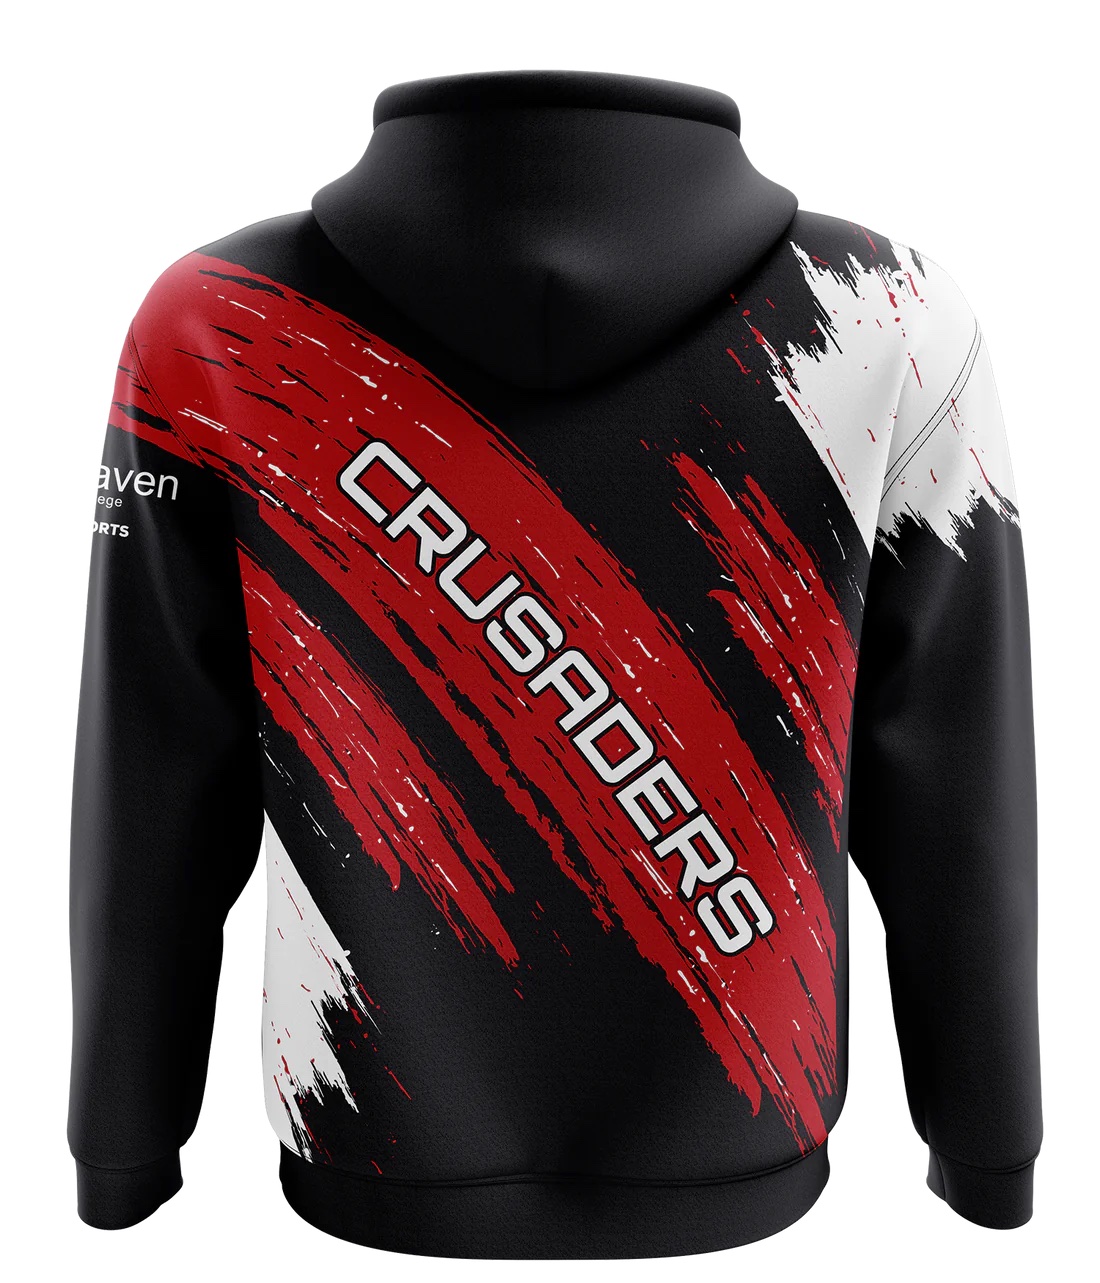 2 aa1c1af8 a10e 46cb a7a7 00c142a9955a 1100x copy - Craven College Crusaders Esports Hoodie - with Gamertag